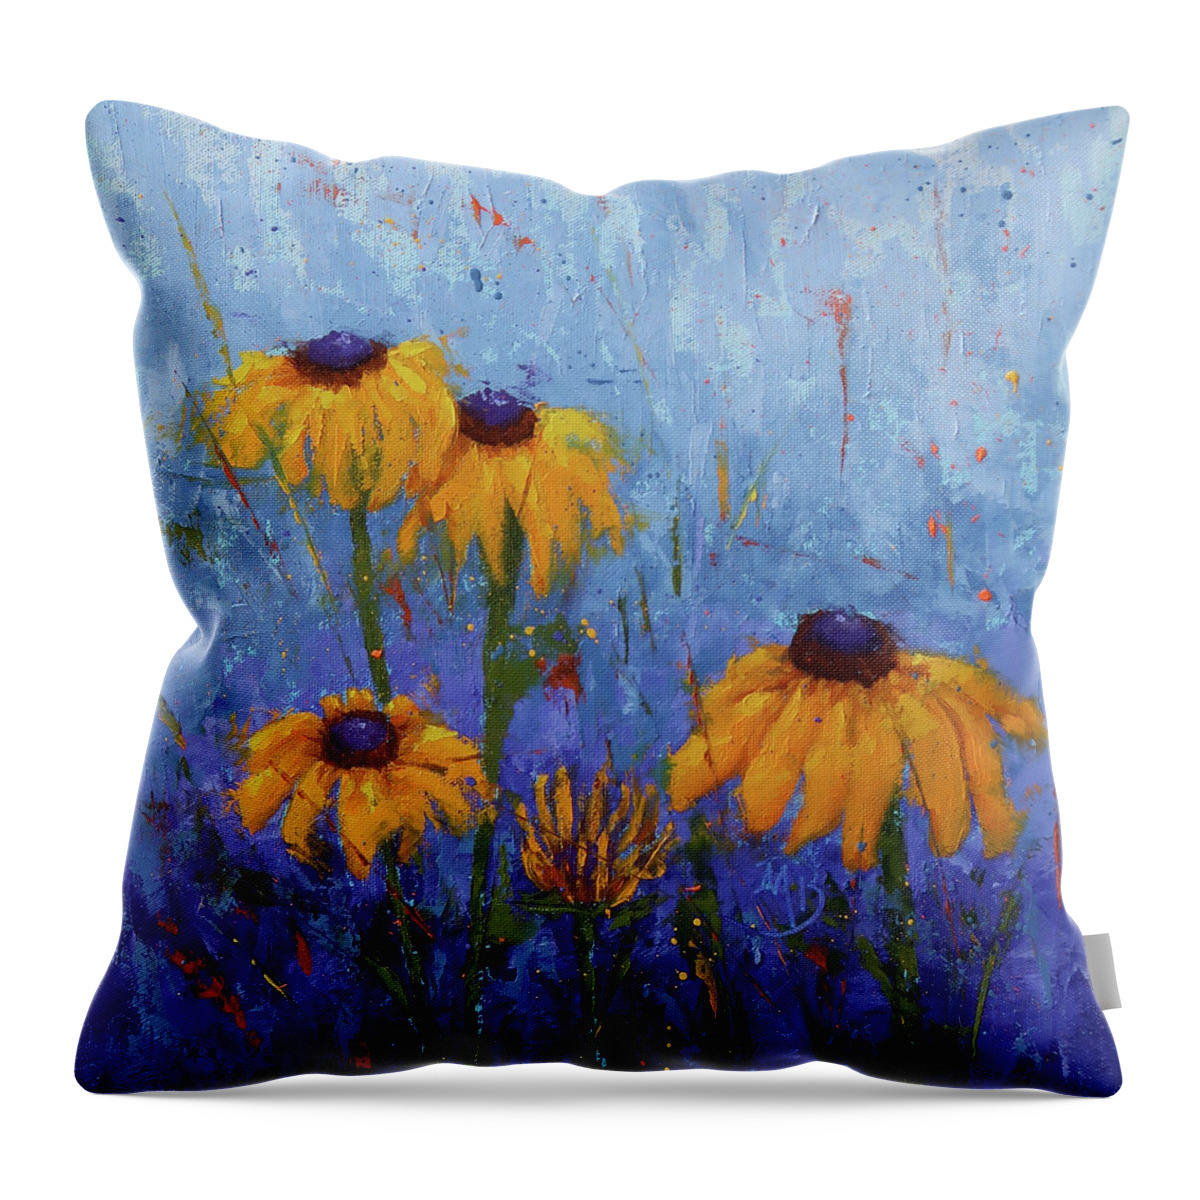 Flowers Throw Pillow featuring the painting Black-eyed Susans by Monica Burnette